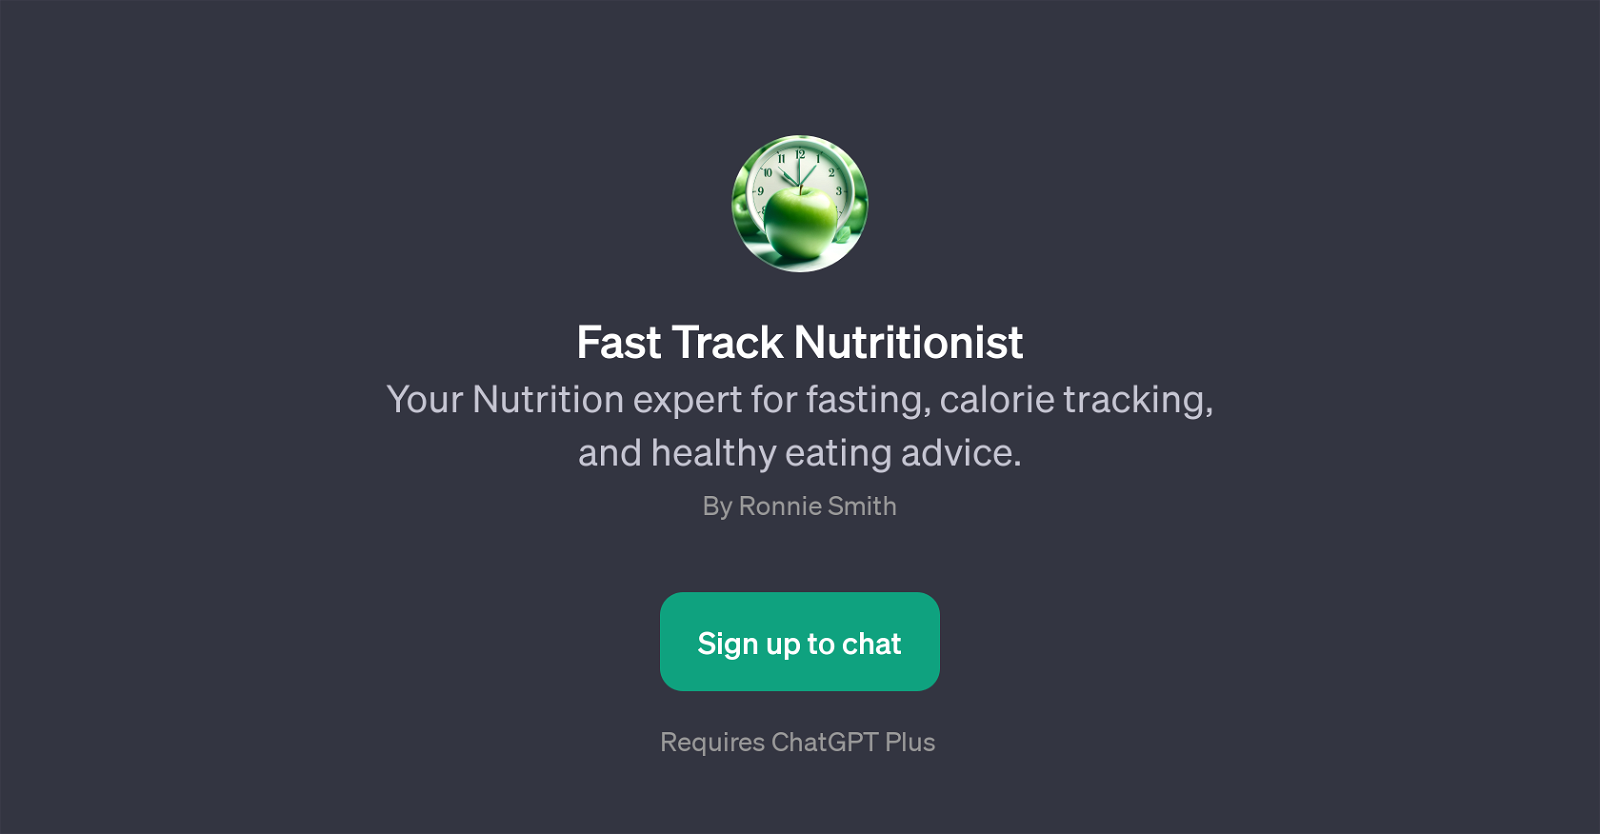 Fast Track Nutritionist website